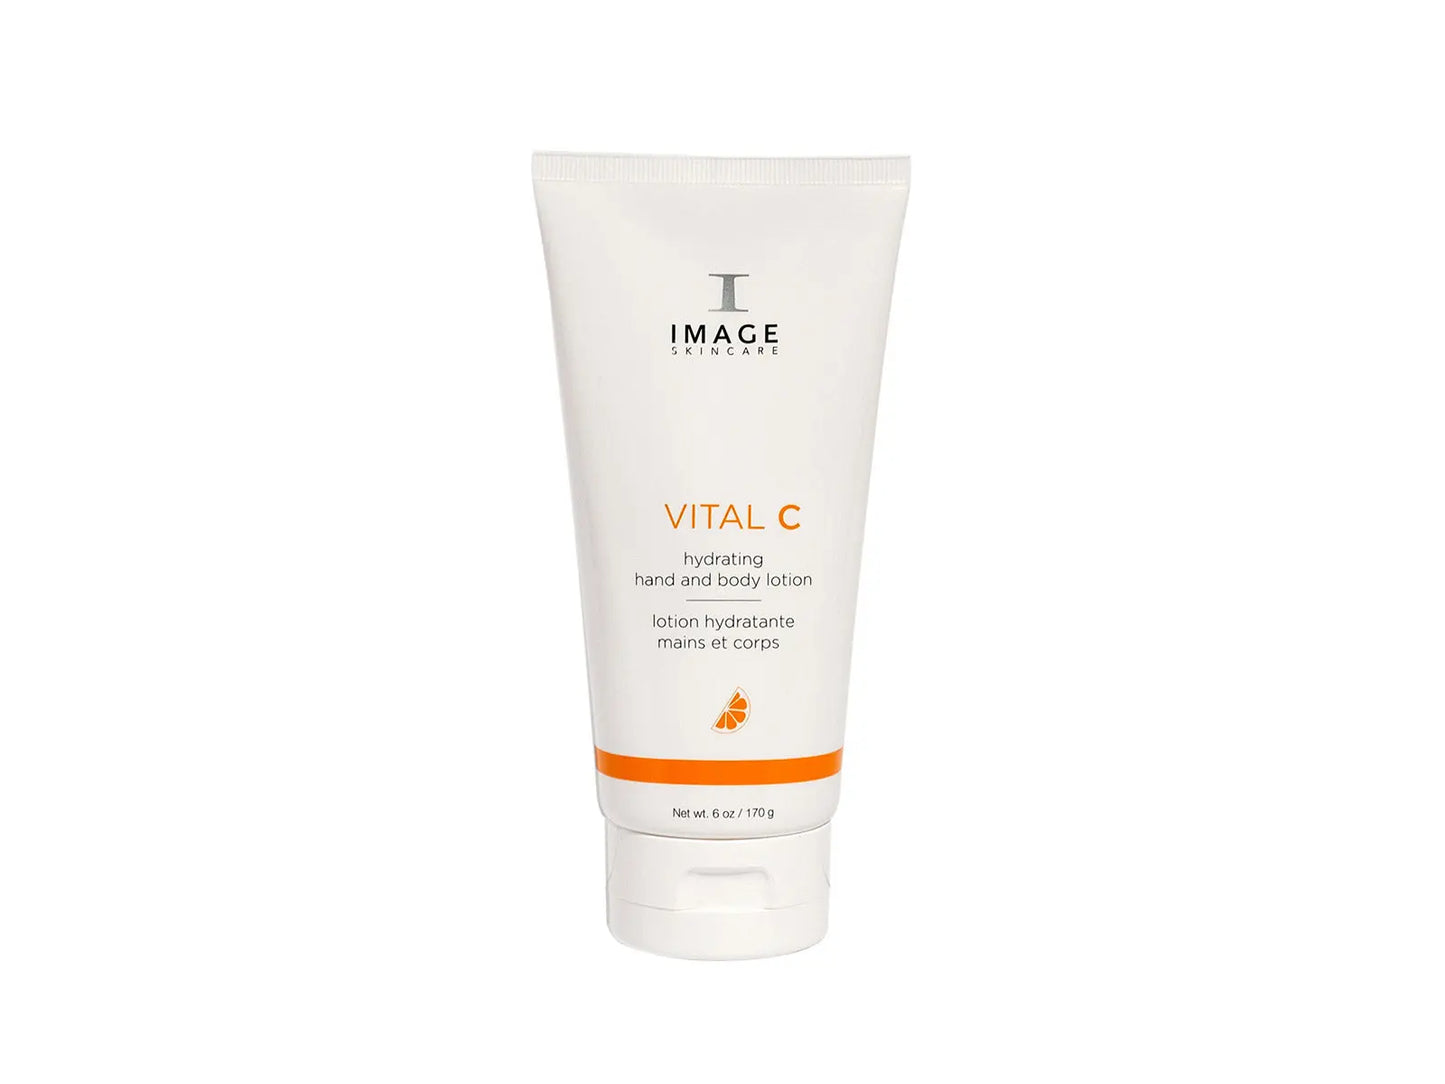 Vital C Hydrating Hand And Body Lotion 170g.